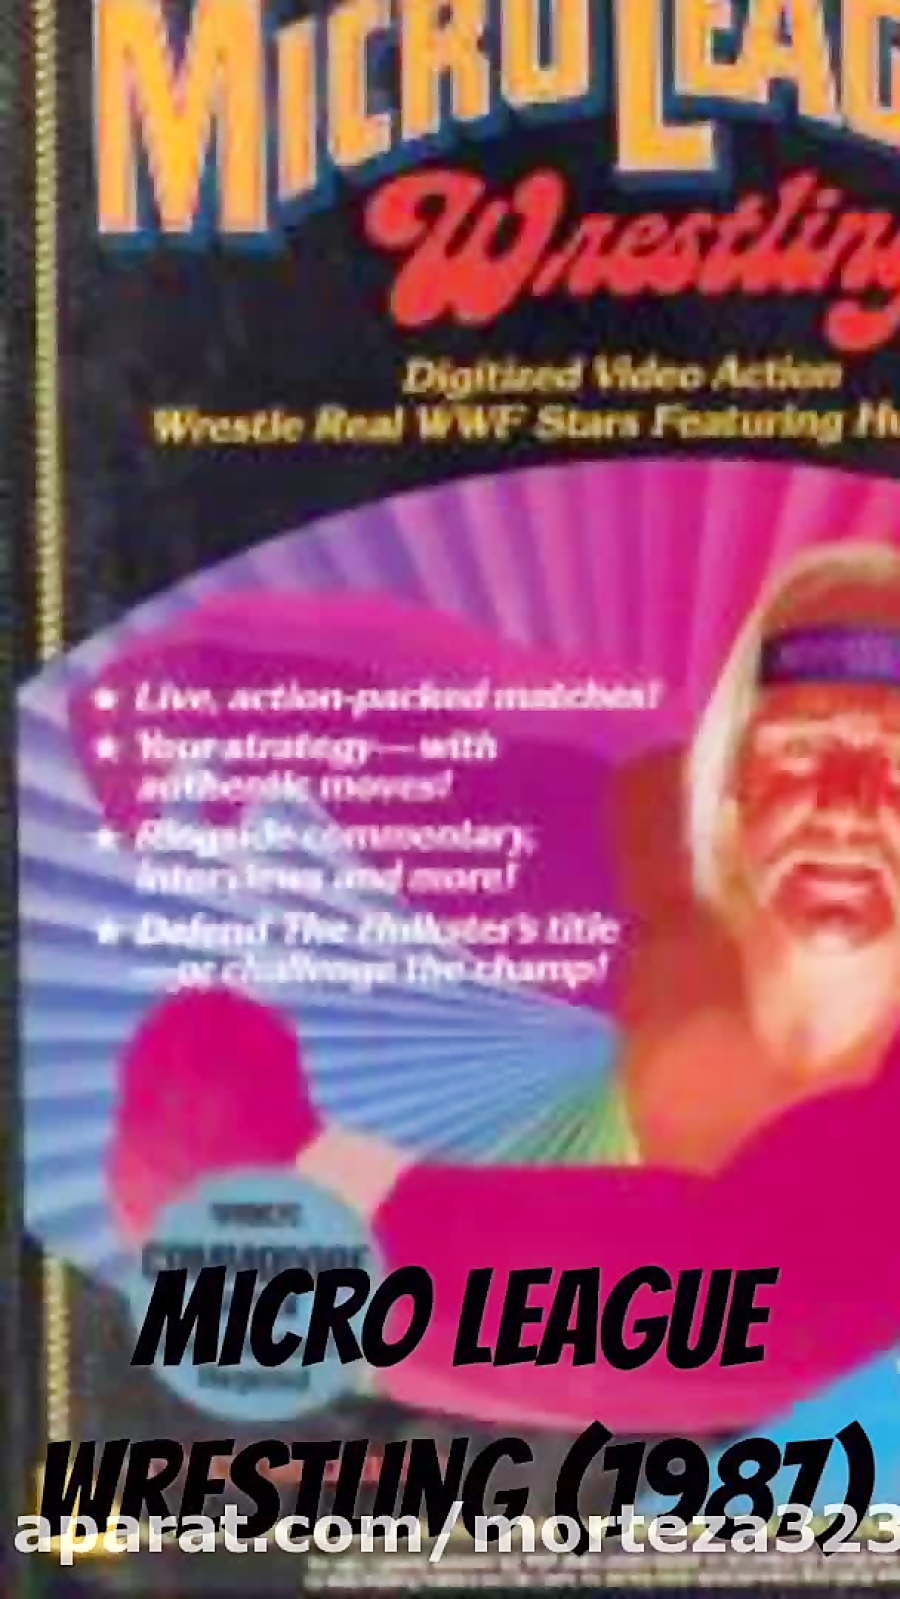 All WWE video game covers (1987-2016)